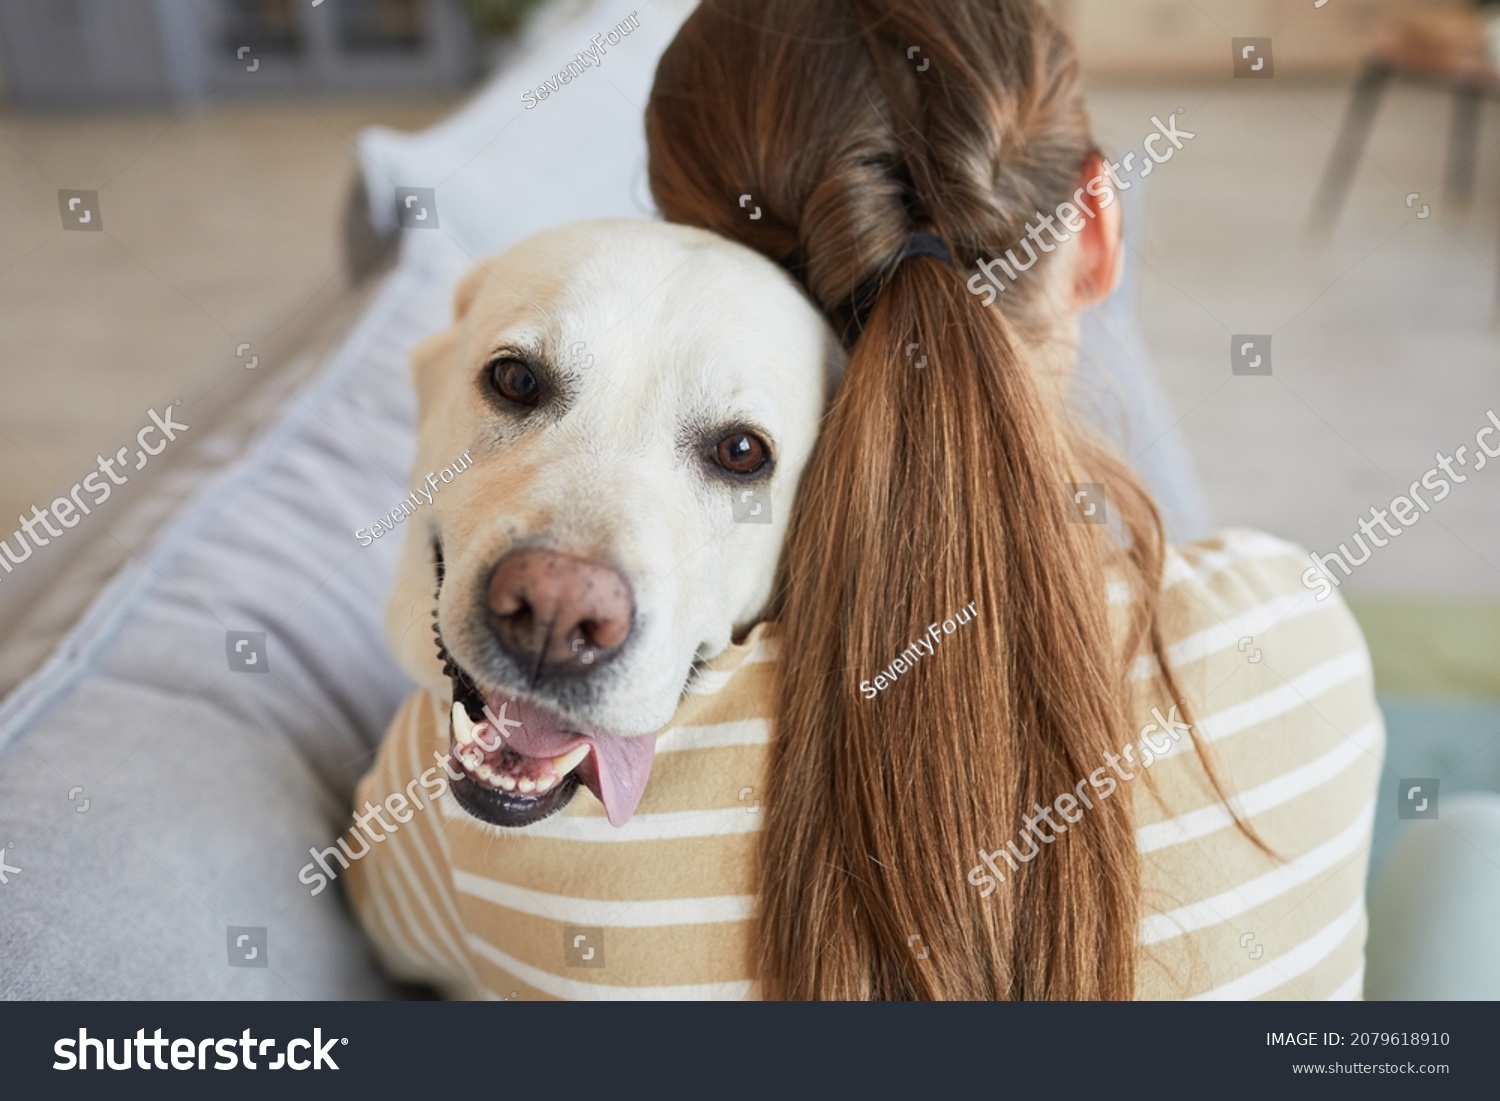 Back view close up of young woman cuddling with dog while lying on couch at home, copy space #2079618910